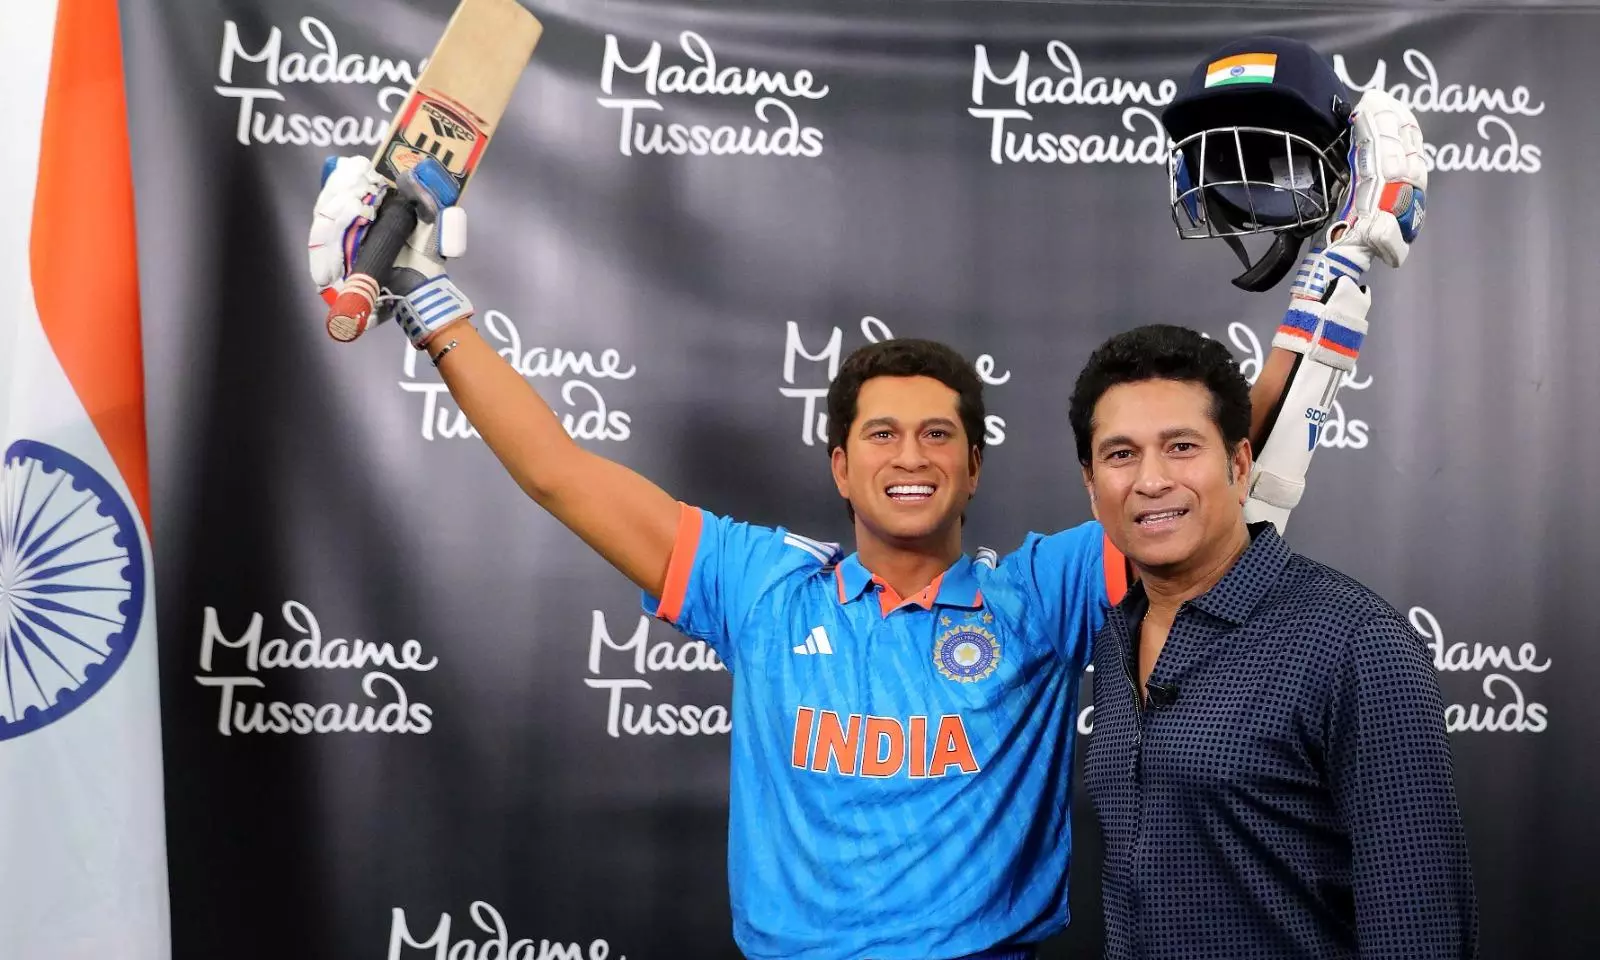 Cricket Icon Sachin Tendulkar Delivers Epic Moment at the ICC Men’s T20 World Cup, Appearing Alongside His Madame Tussauds New York Wax Figure